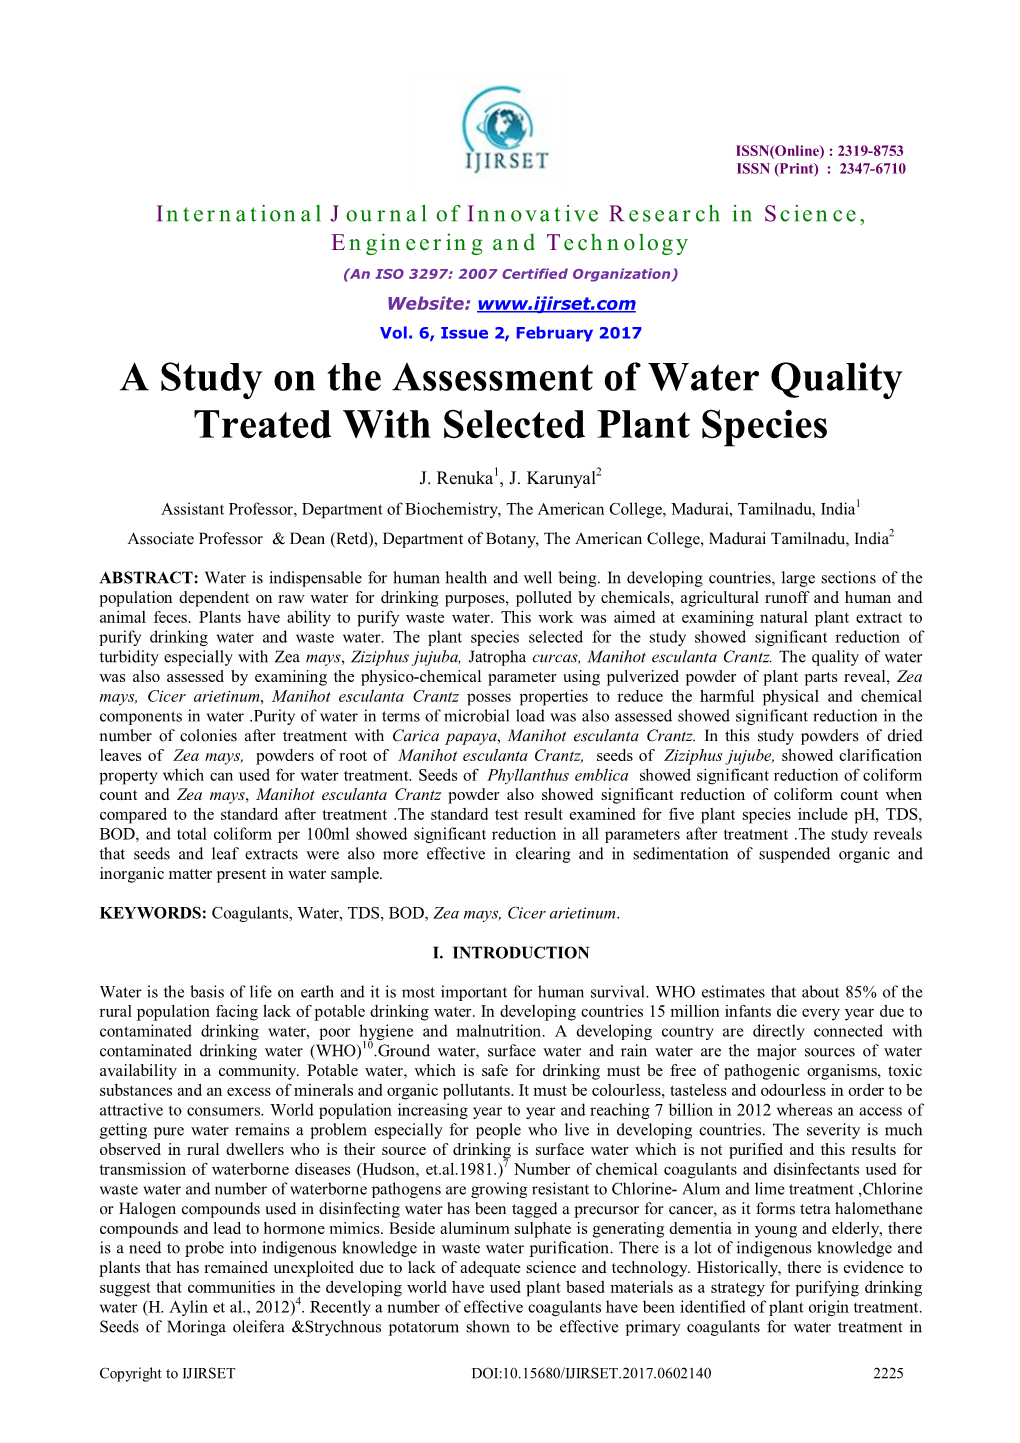 A Study on the Assessment of Water Quality Treated with Selected Plant Species